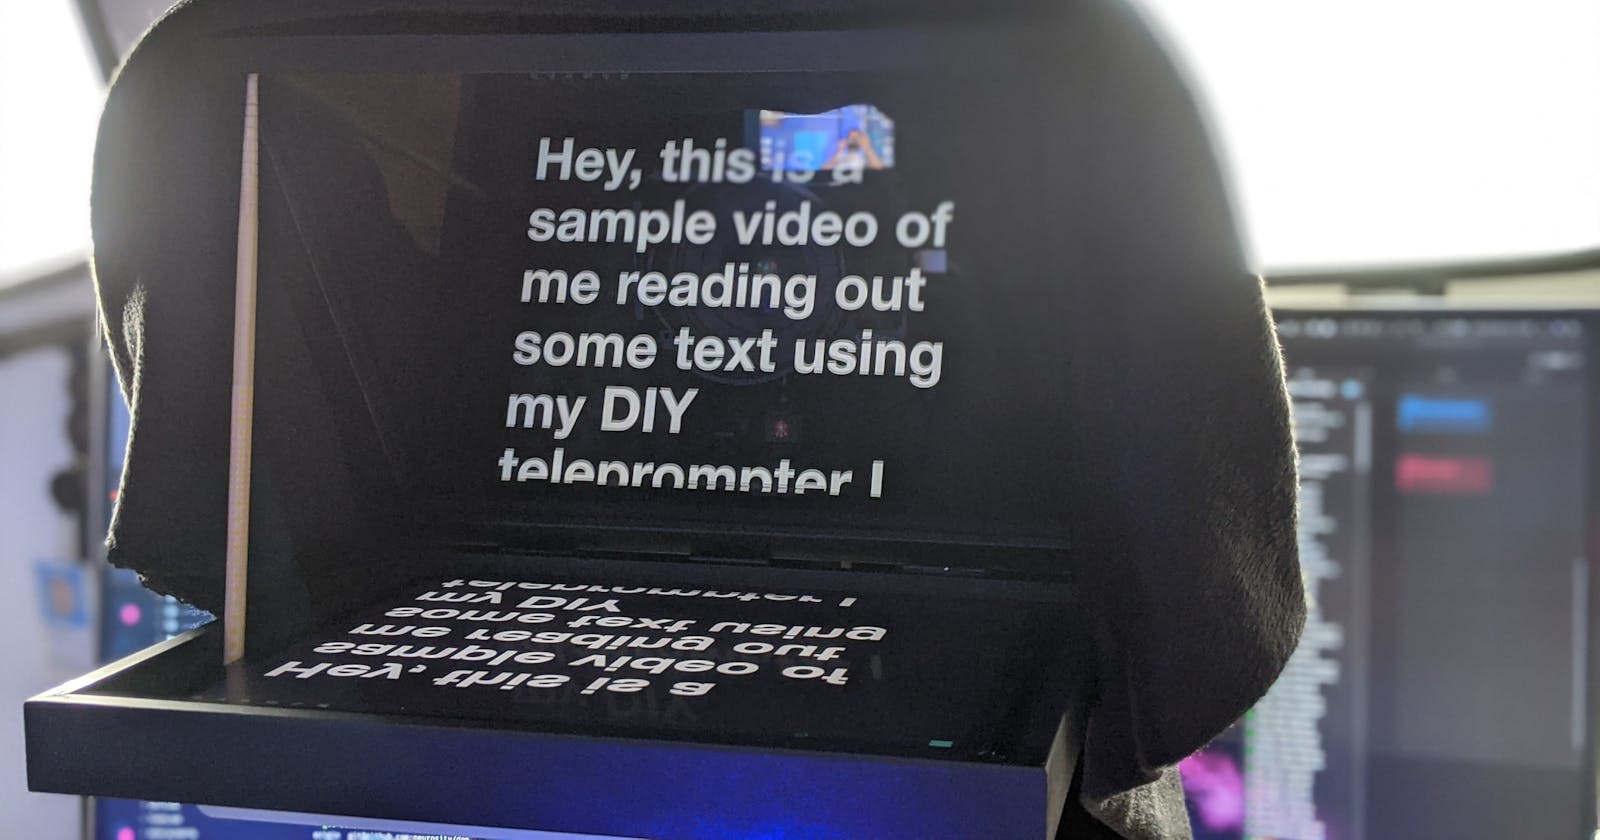 Build a DIY teleprompter for under $20 in less than 20min